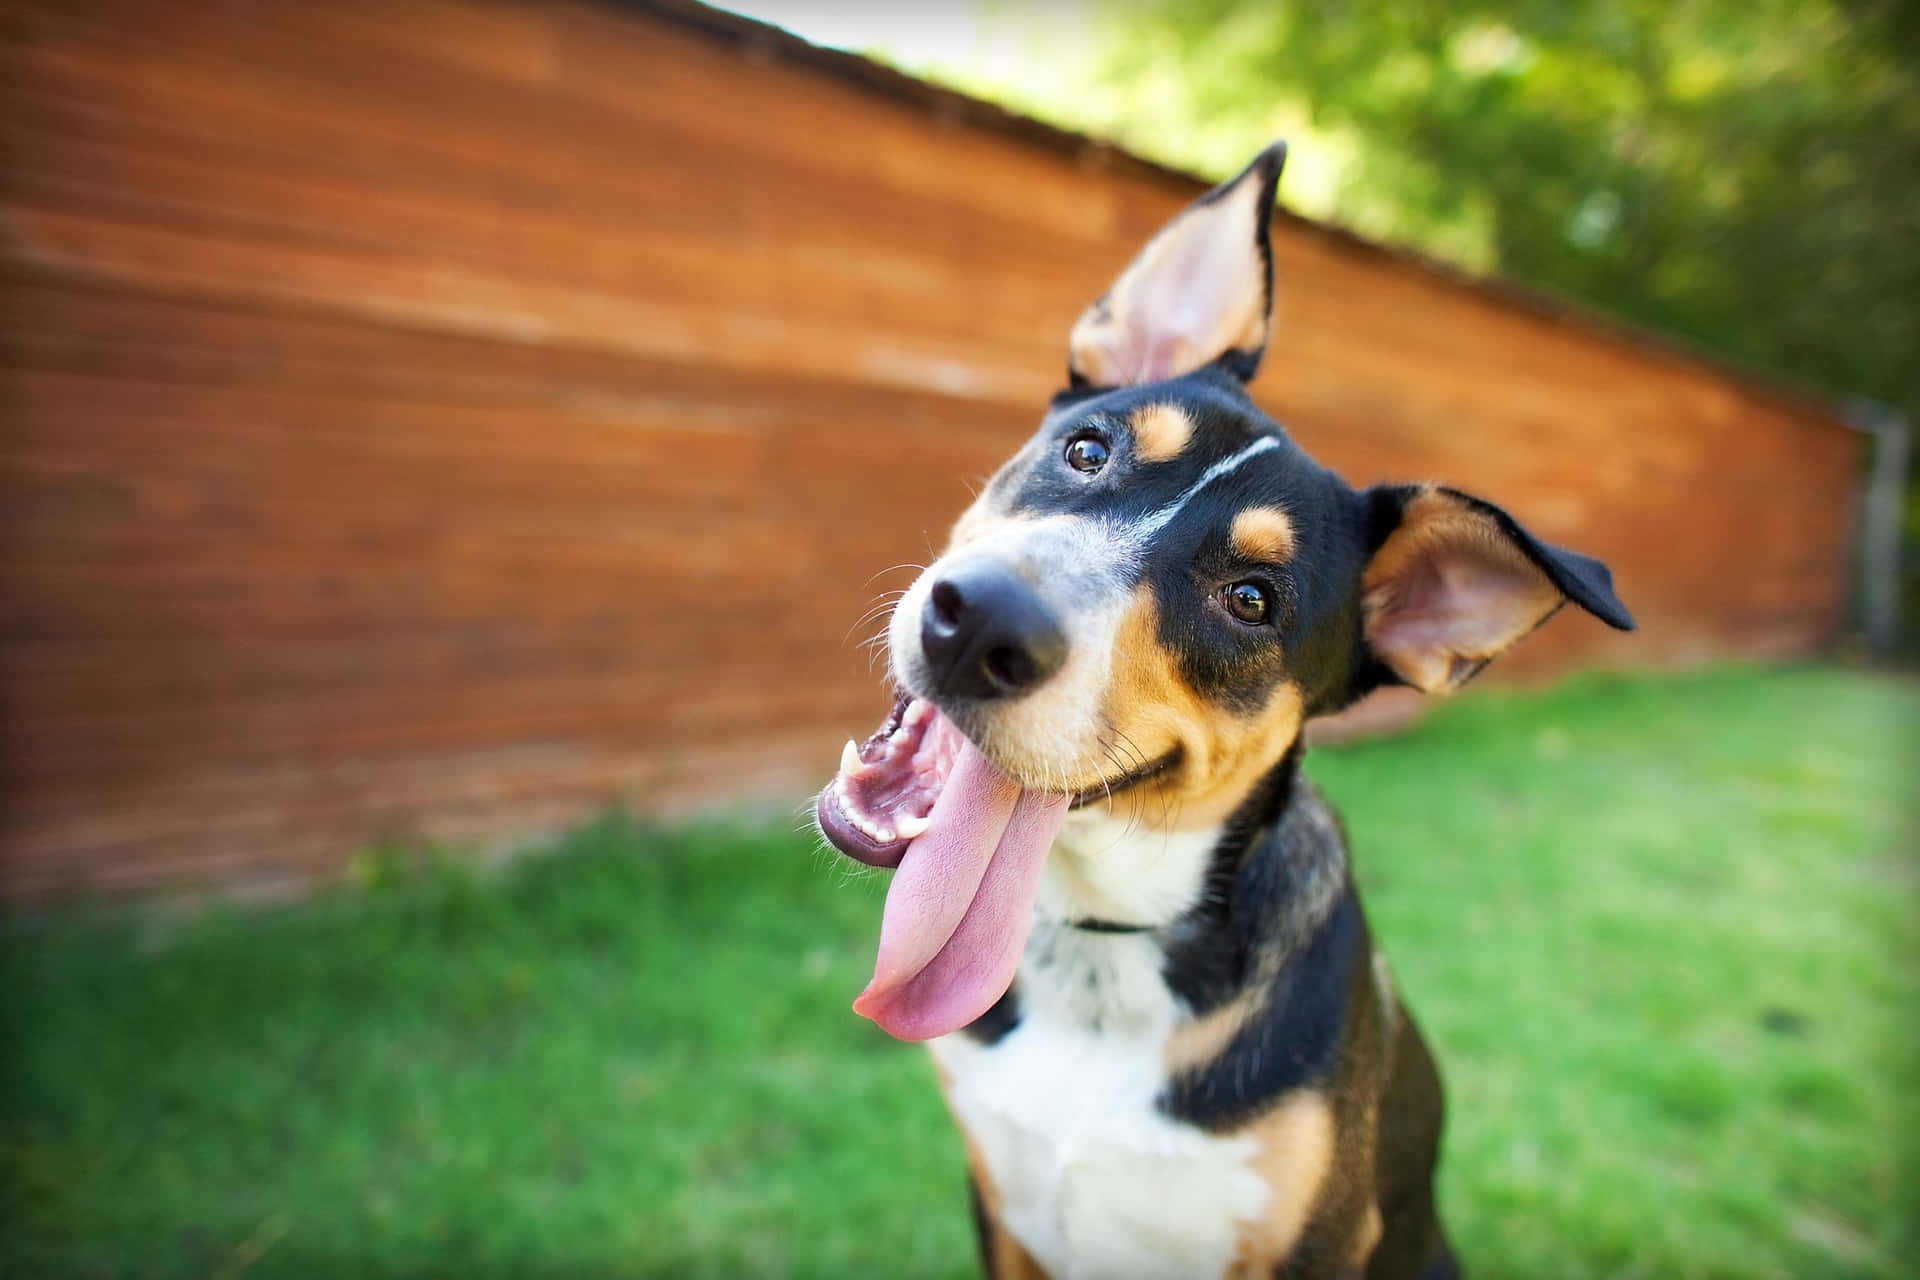 A Dog With Its Tongue Out In Front Of A Wooden Fence